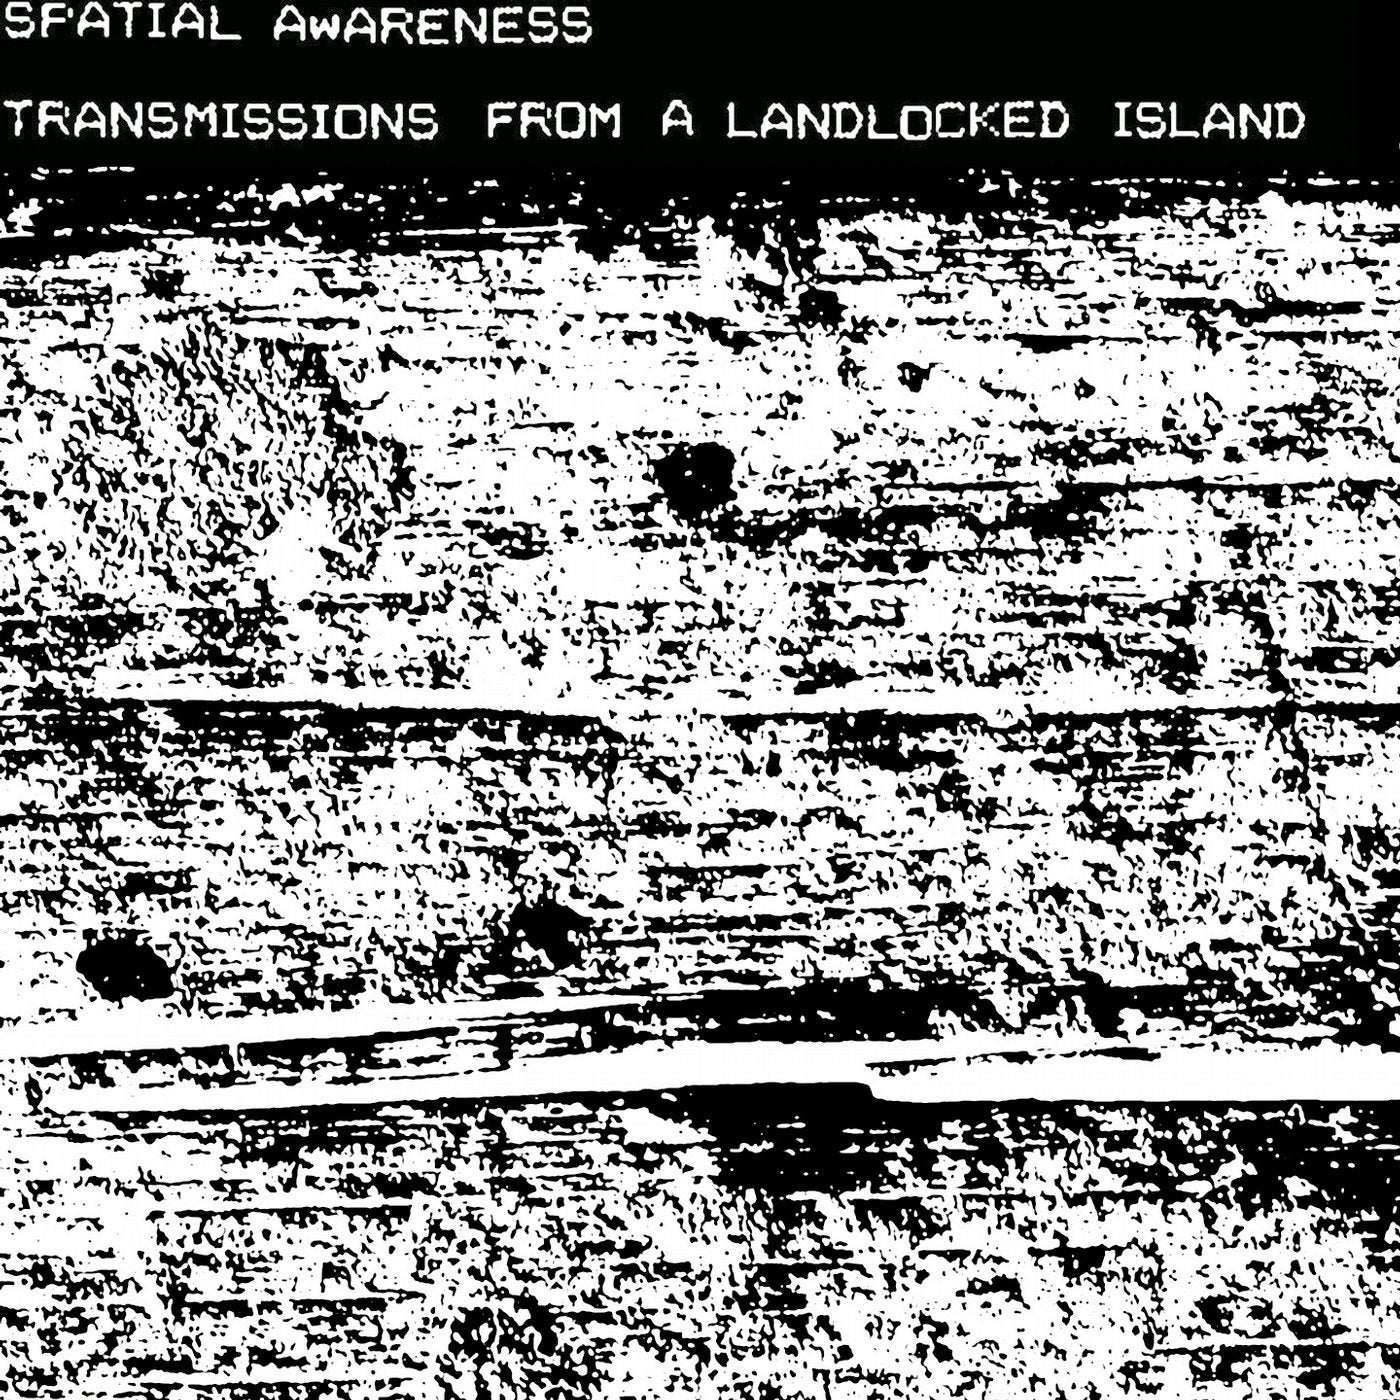 Transmissions from a Landlocked Island